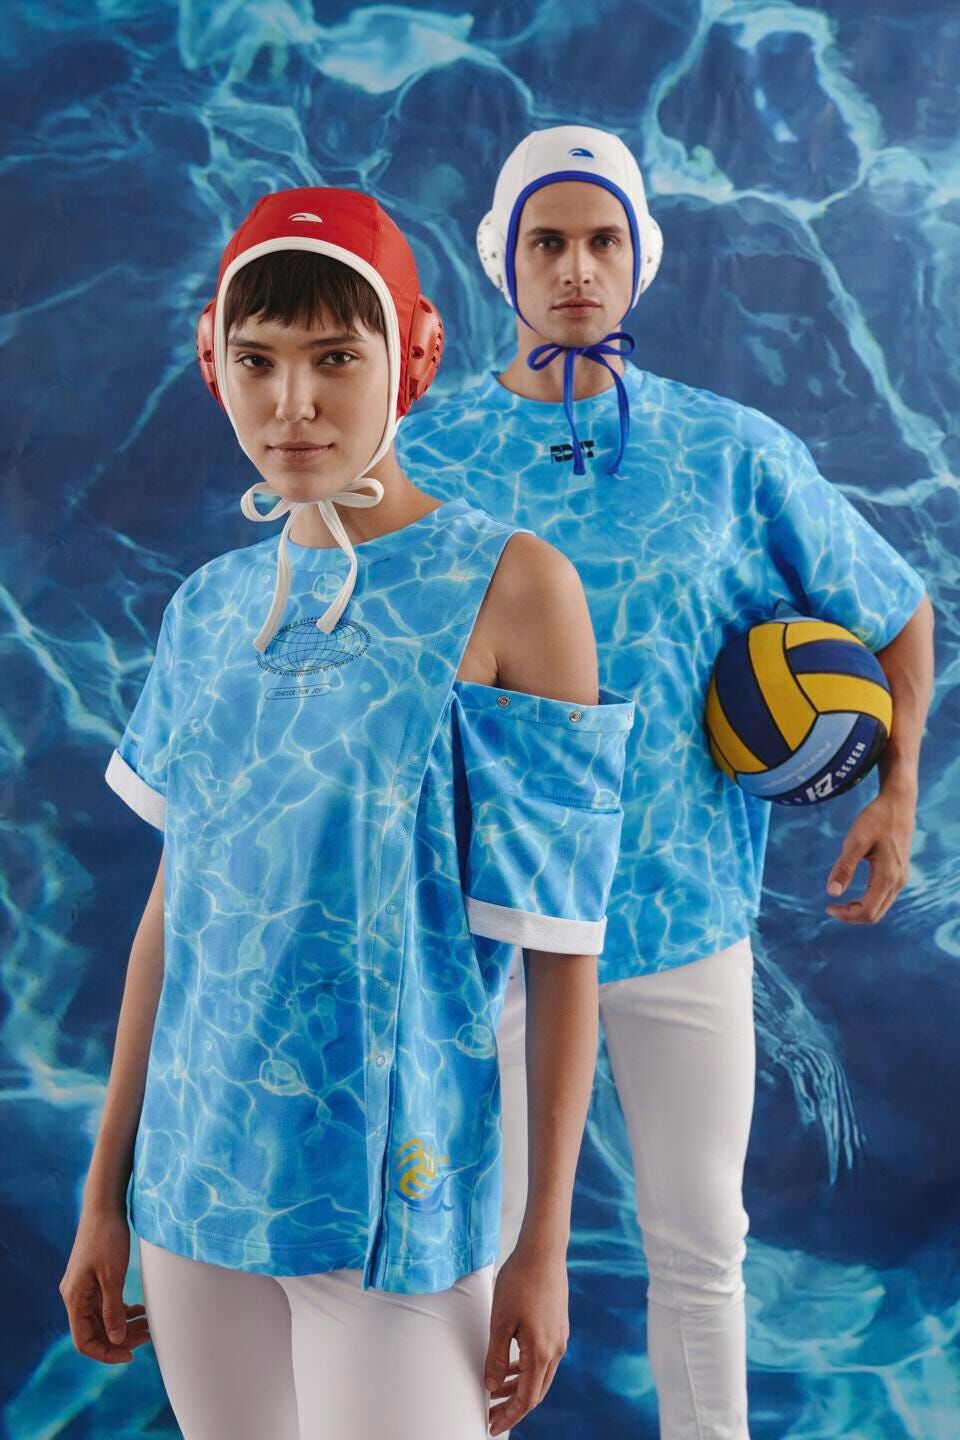 Oleksandr Svishchov: Collaboration with Andre Tan is our way to draw public attention to water polo and raise money to help children affected by the war  1